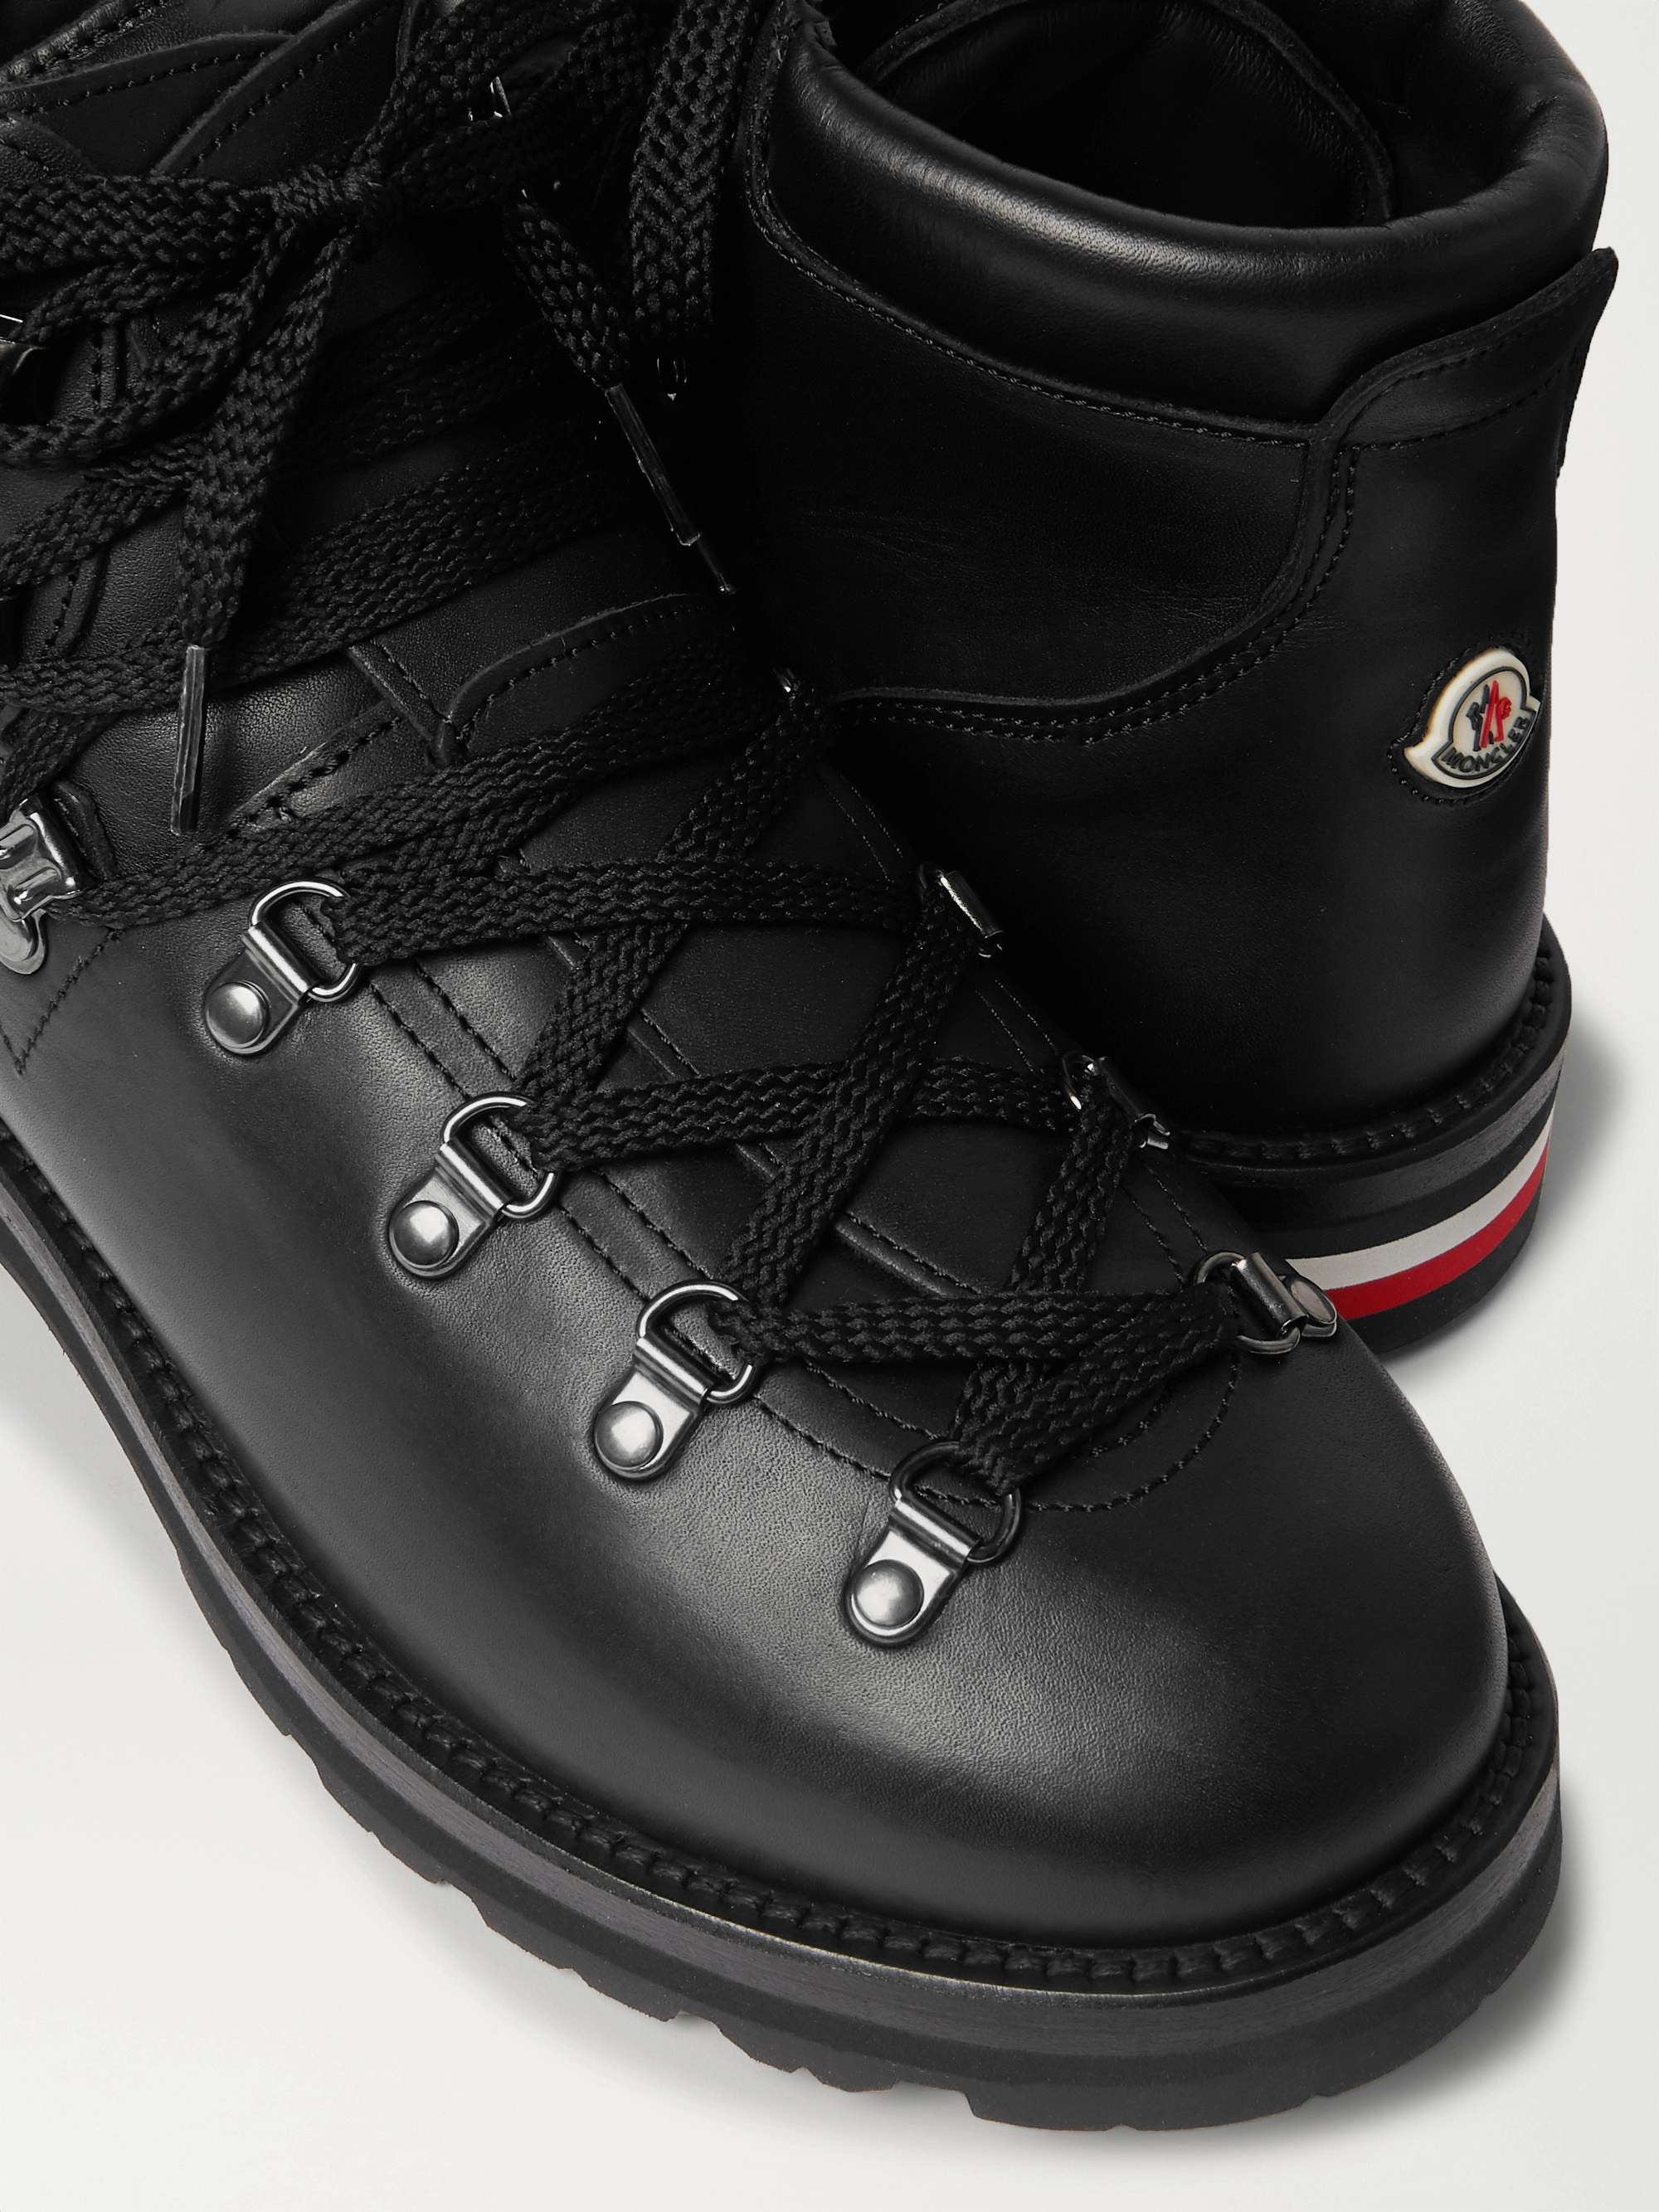 MONCLER Striped Full-Grain Leather Boots